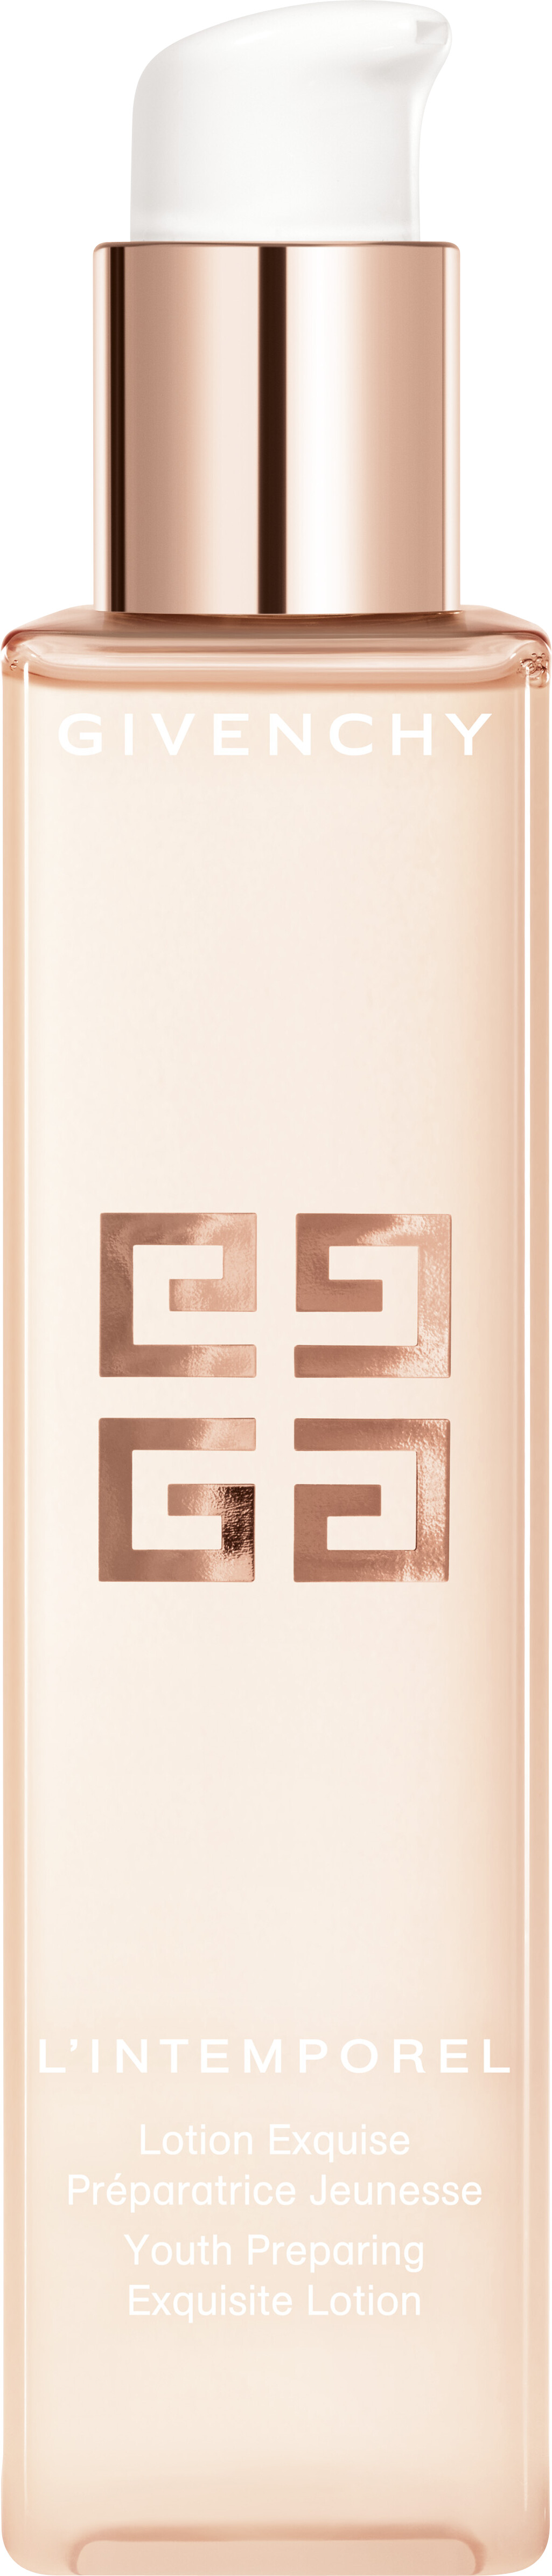 GIVENCHY L'Intemporel Youth Preparing Exquisite Lotion 200ml